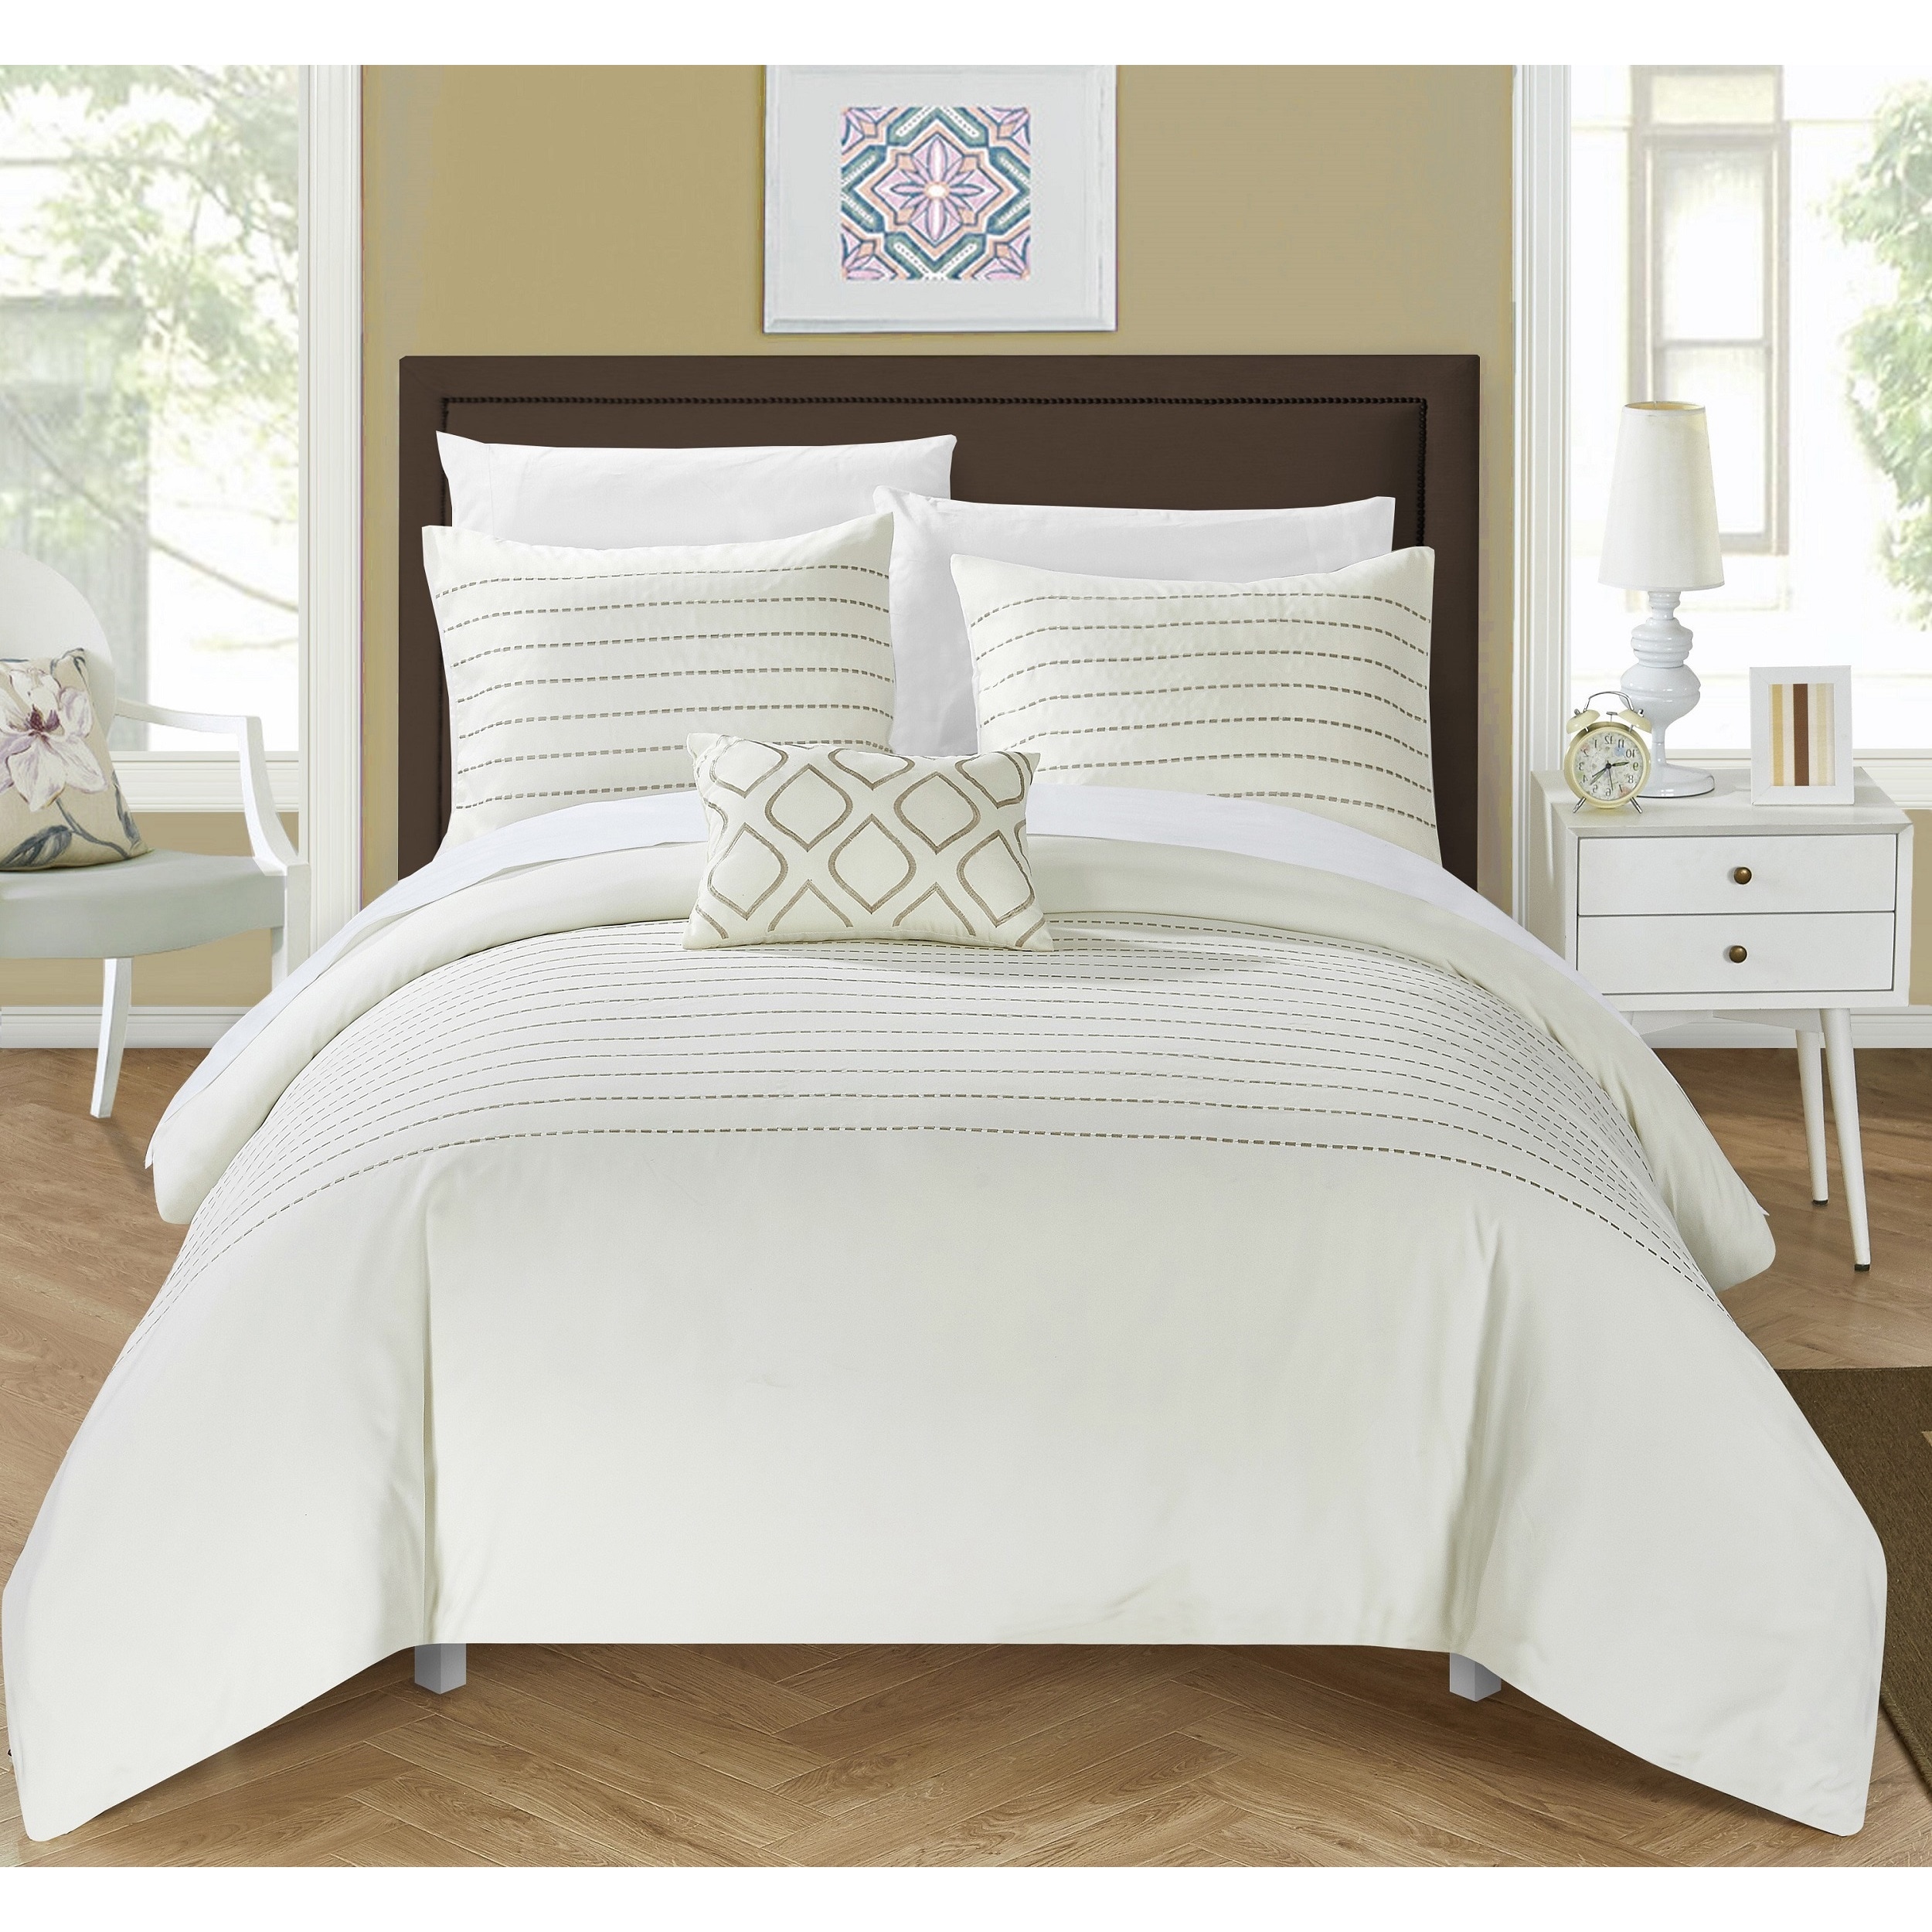 Chic Home 4 Piece Kingston Beige Duvet Cover Set Free Shipping